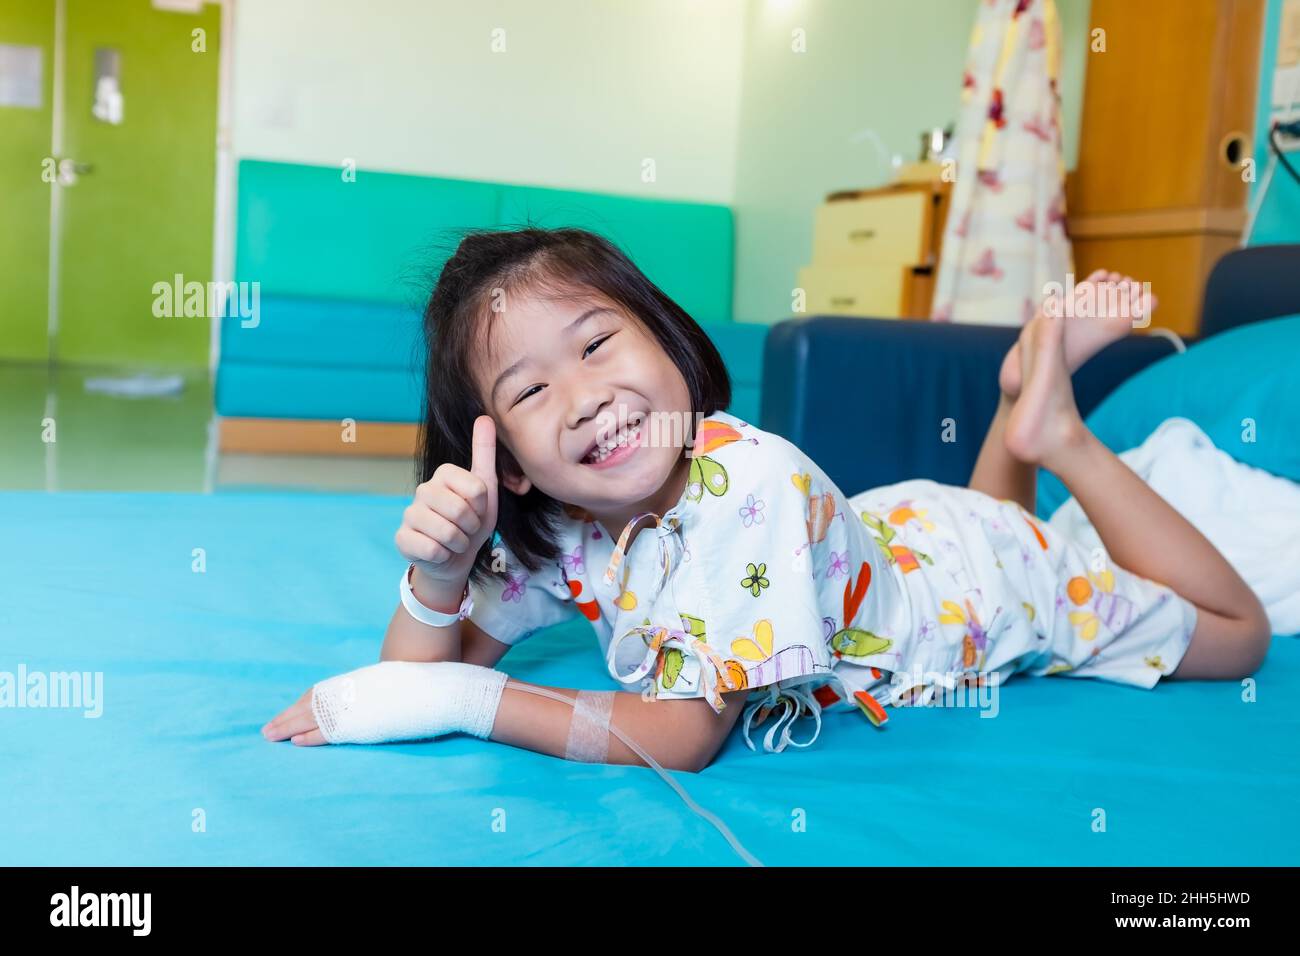 Illness asian child smiling happily and showing thumb up sign. Girl admitted in hospital while saline intravenous (IV) on hand. Health care stories. Stock Photo